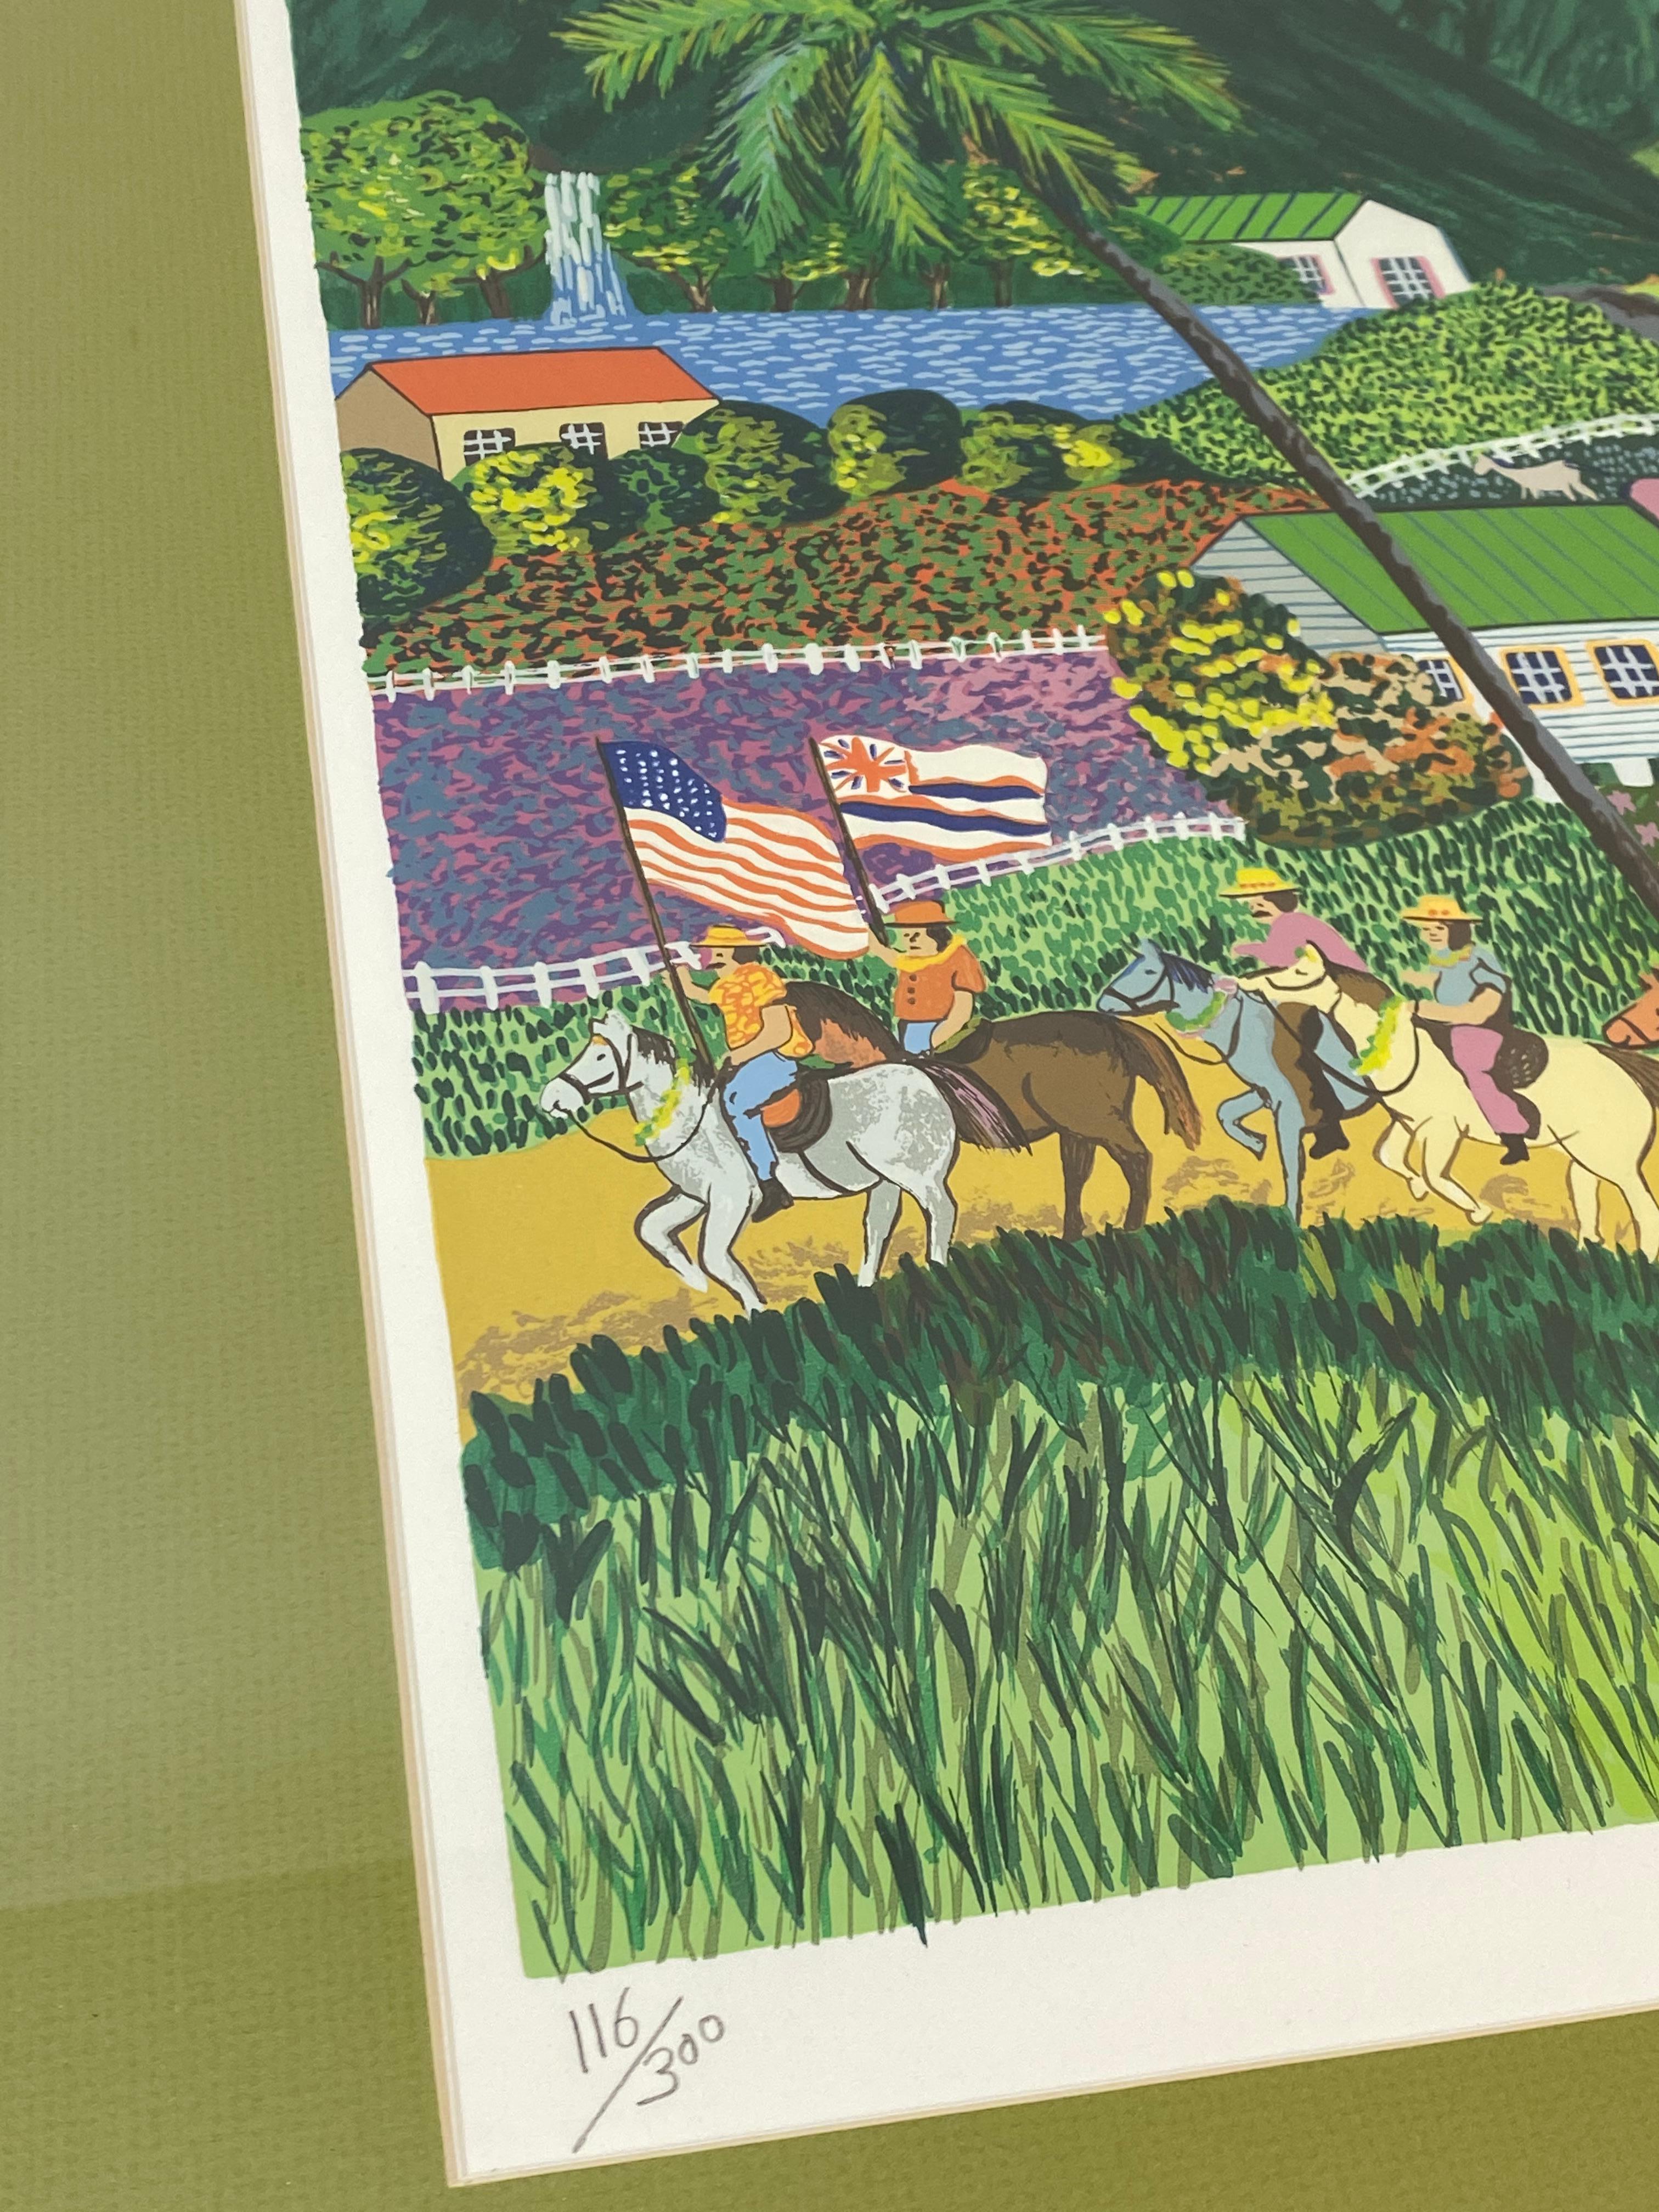 Guy Buffet Limited Edition Hawaii Lithograph C.1990s

Bright, colorful and whimsical lithograph by listed artist Guy Buffet

A procession of horses through a Hawaiian village landsacape

Dimensions 32